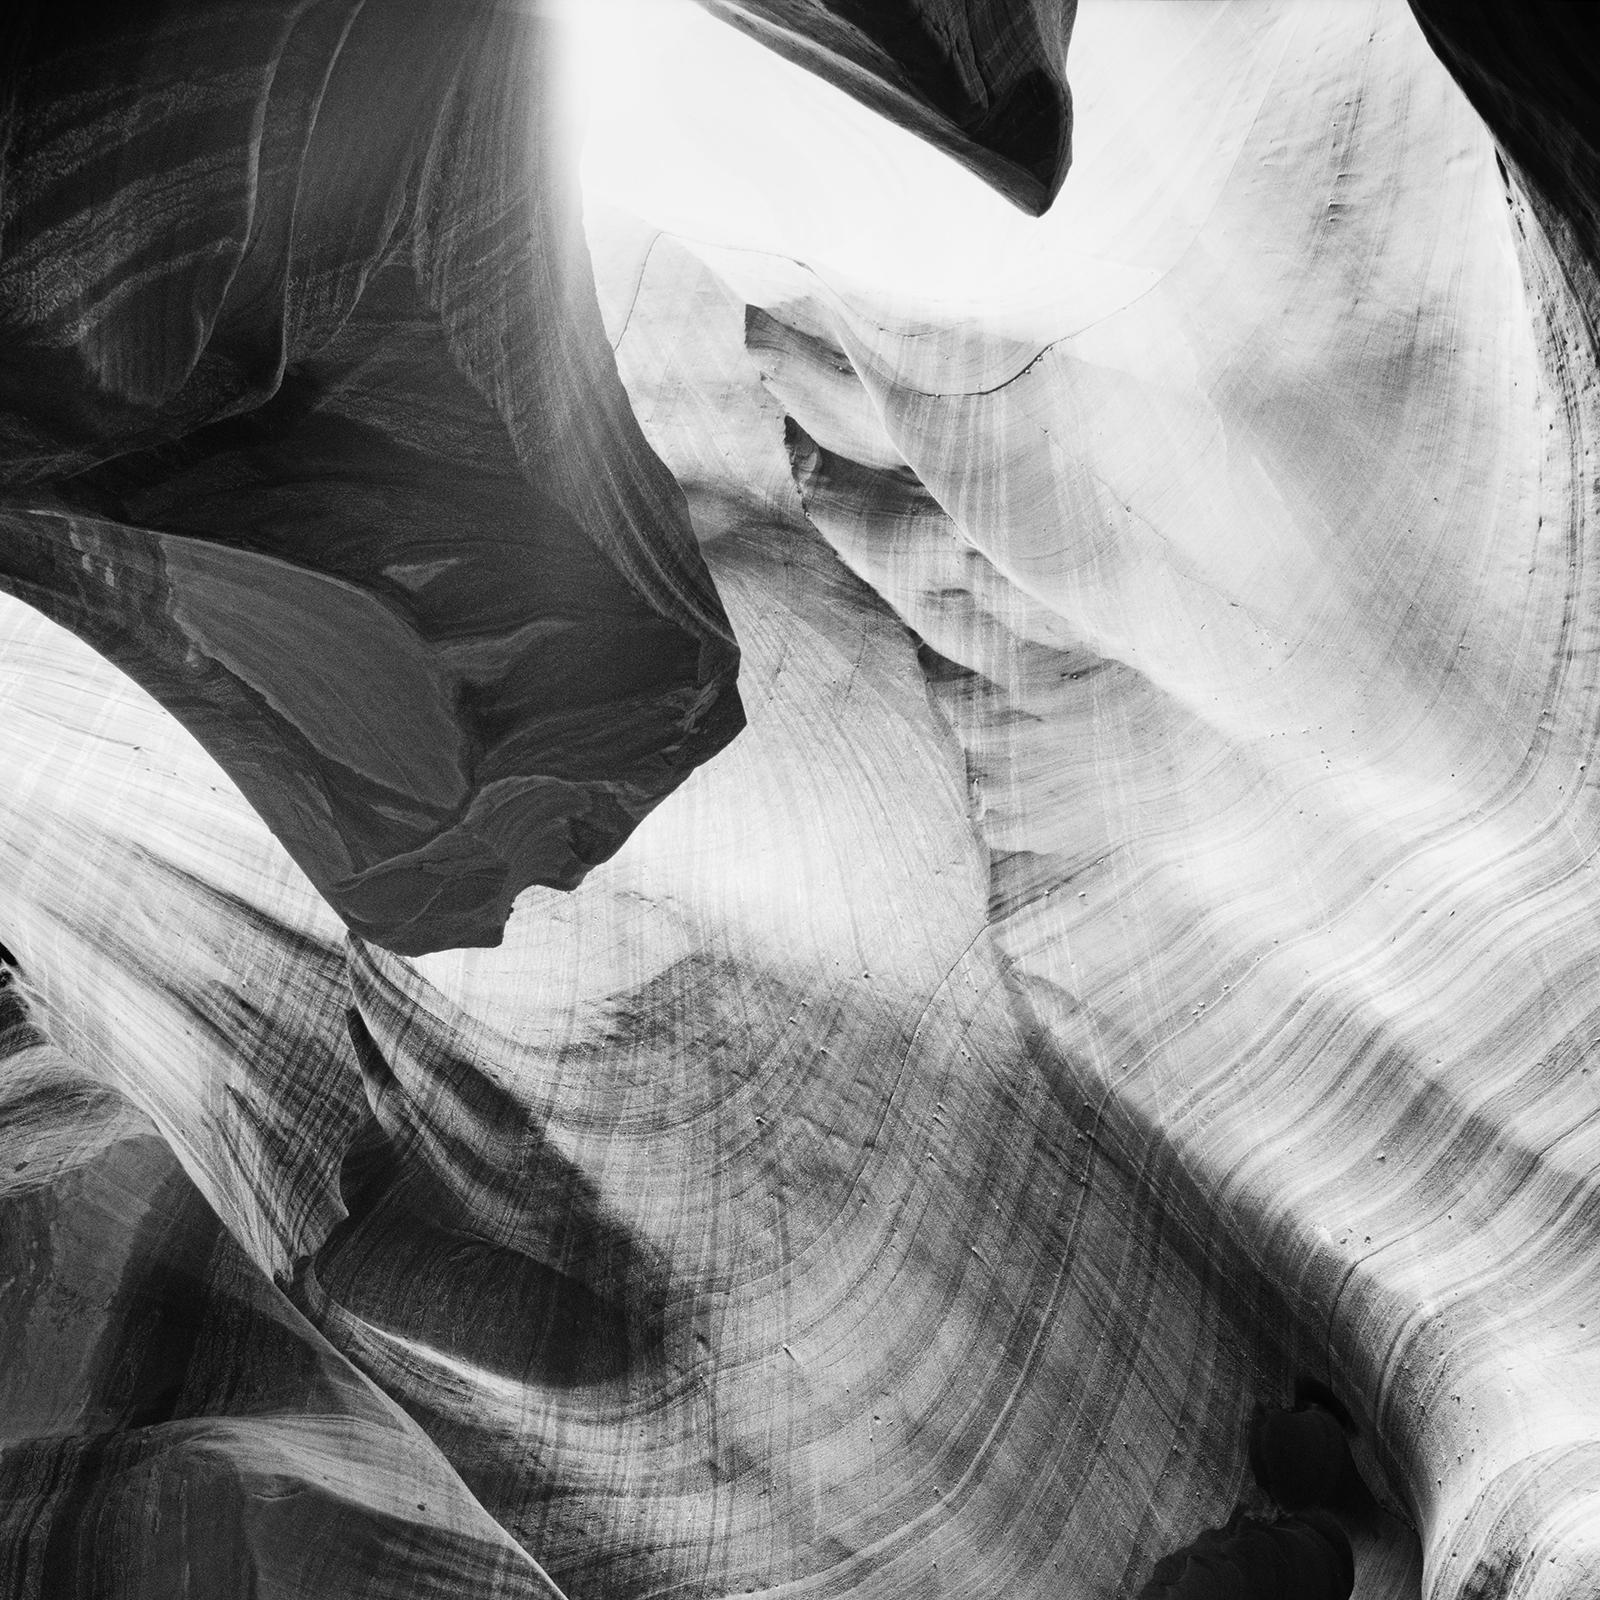 Black and white fine art landscape photography. Antelope Canyon sandstone formation detail, Page, Arizona, USA. Archival pigment ink print as part of a limited edition of 7. All Gerald Berghammer prints are made to order in limited editions on